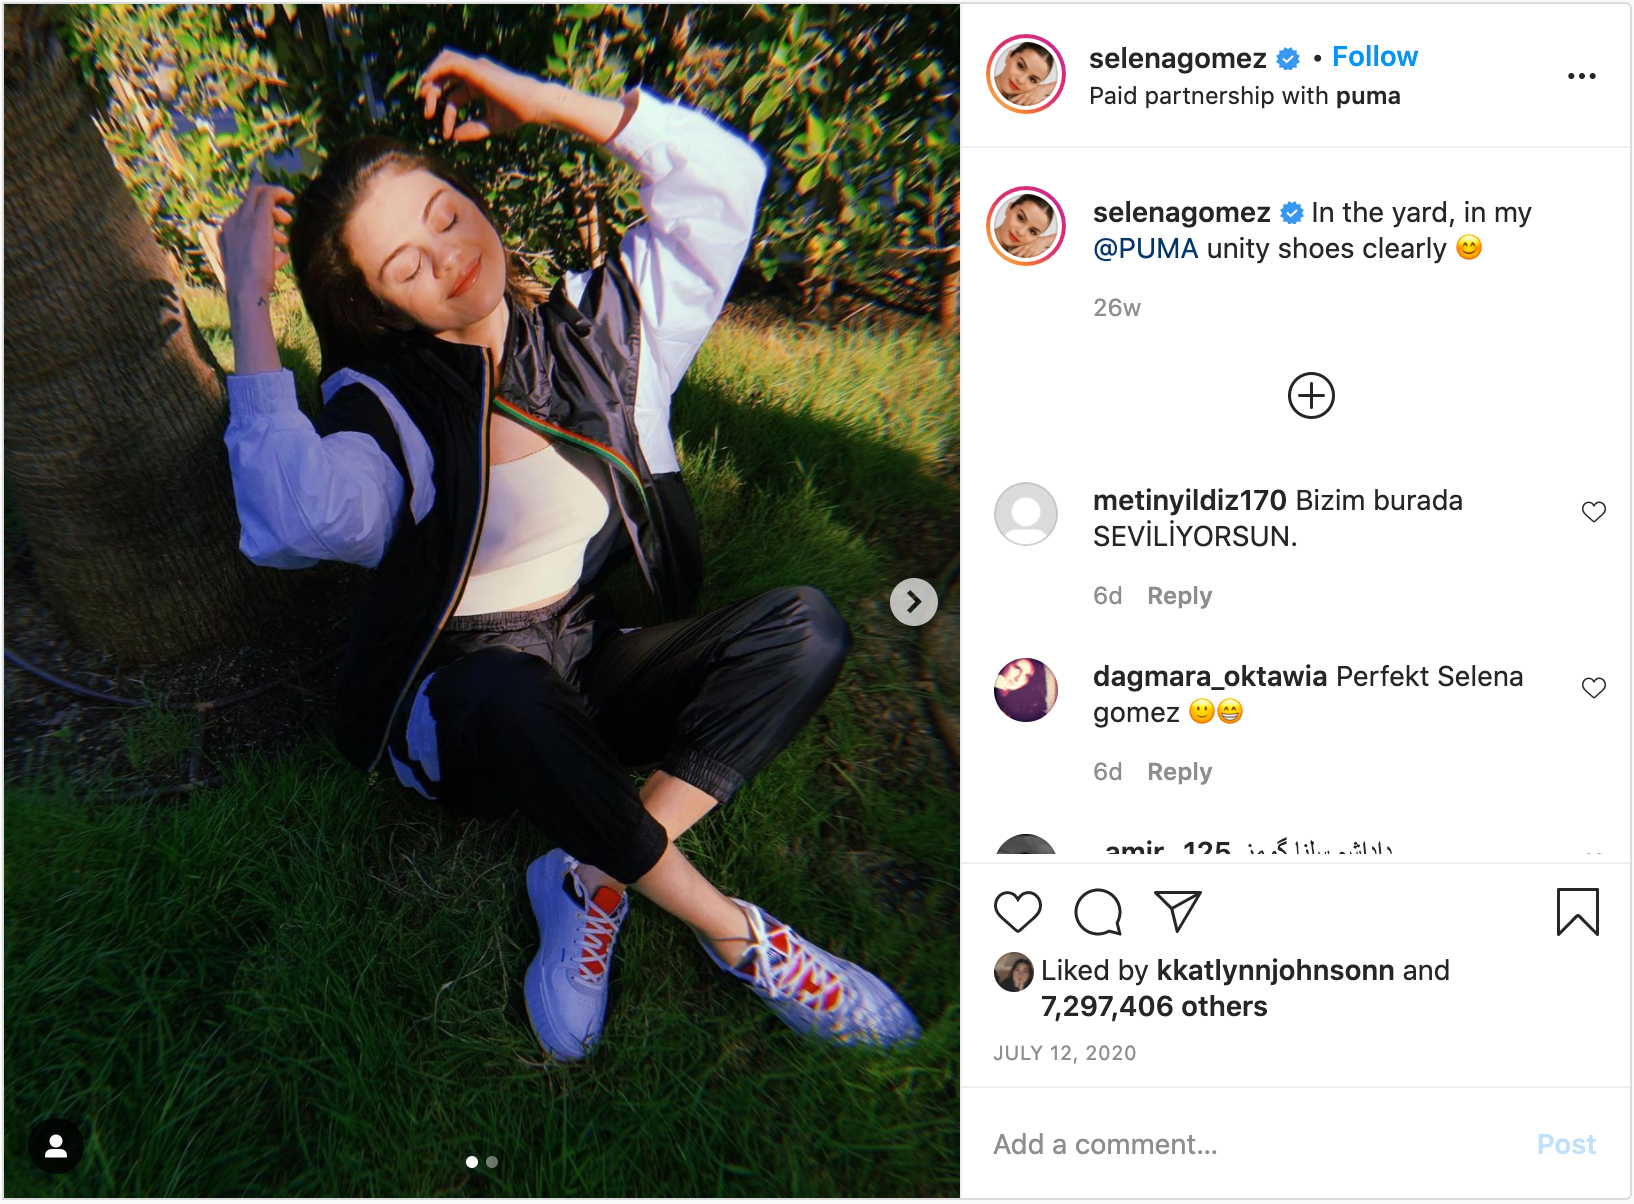 Top IG Sponsored Posts of the Year (2020)